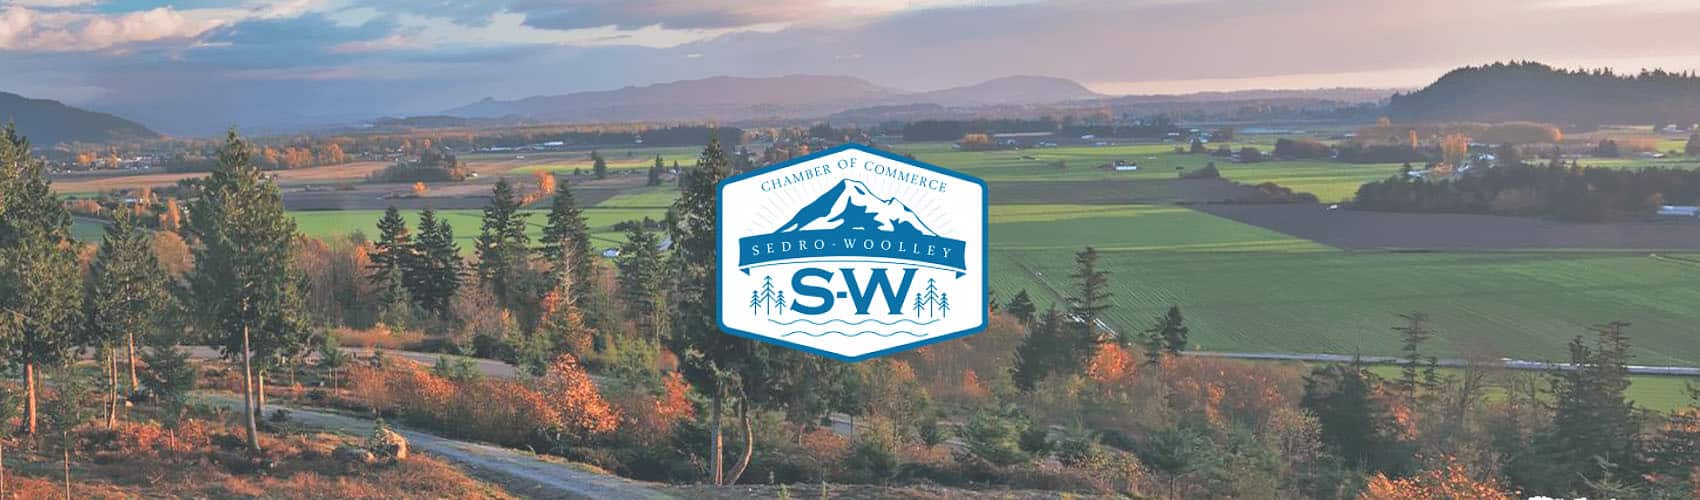 Sedro-Woolley fields with chamber logo